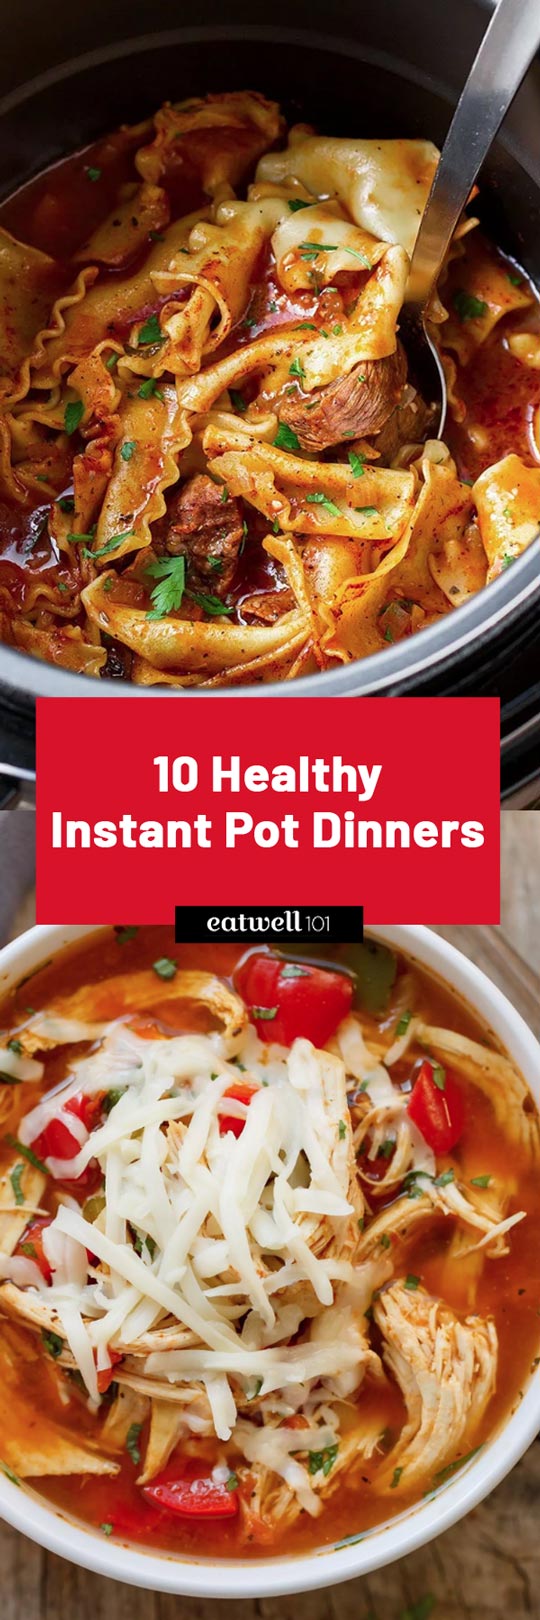 Healthy Instant Pot Dinner Recipes - These healthy Instant Pot dinner recipes are great if you would like to get a quick, healthy dinner on the table every night.